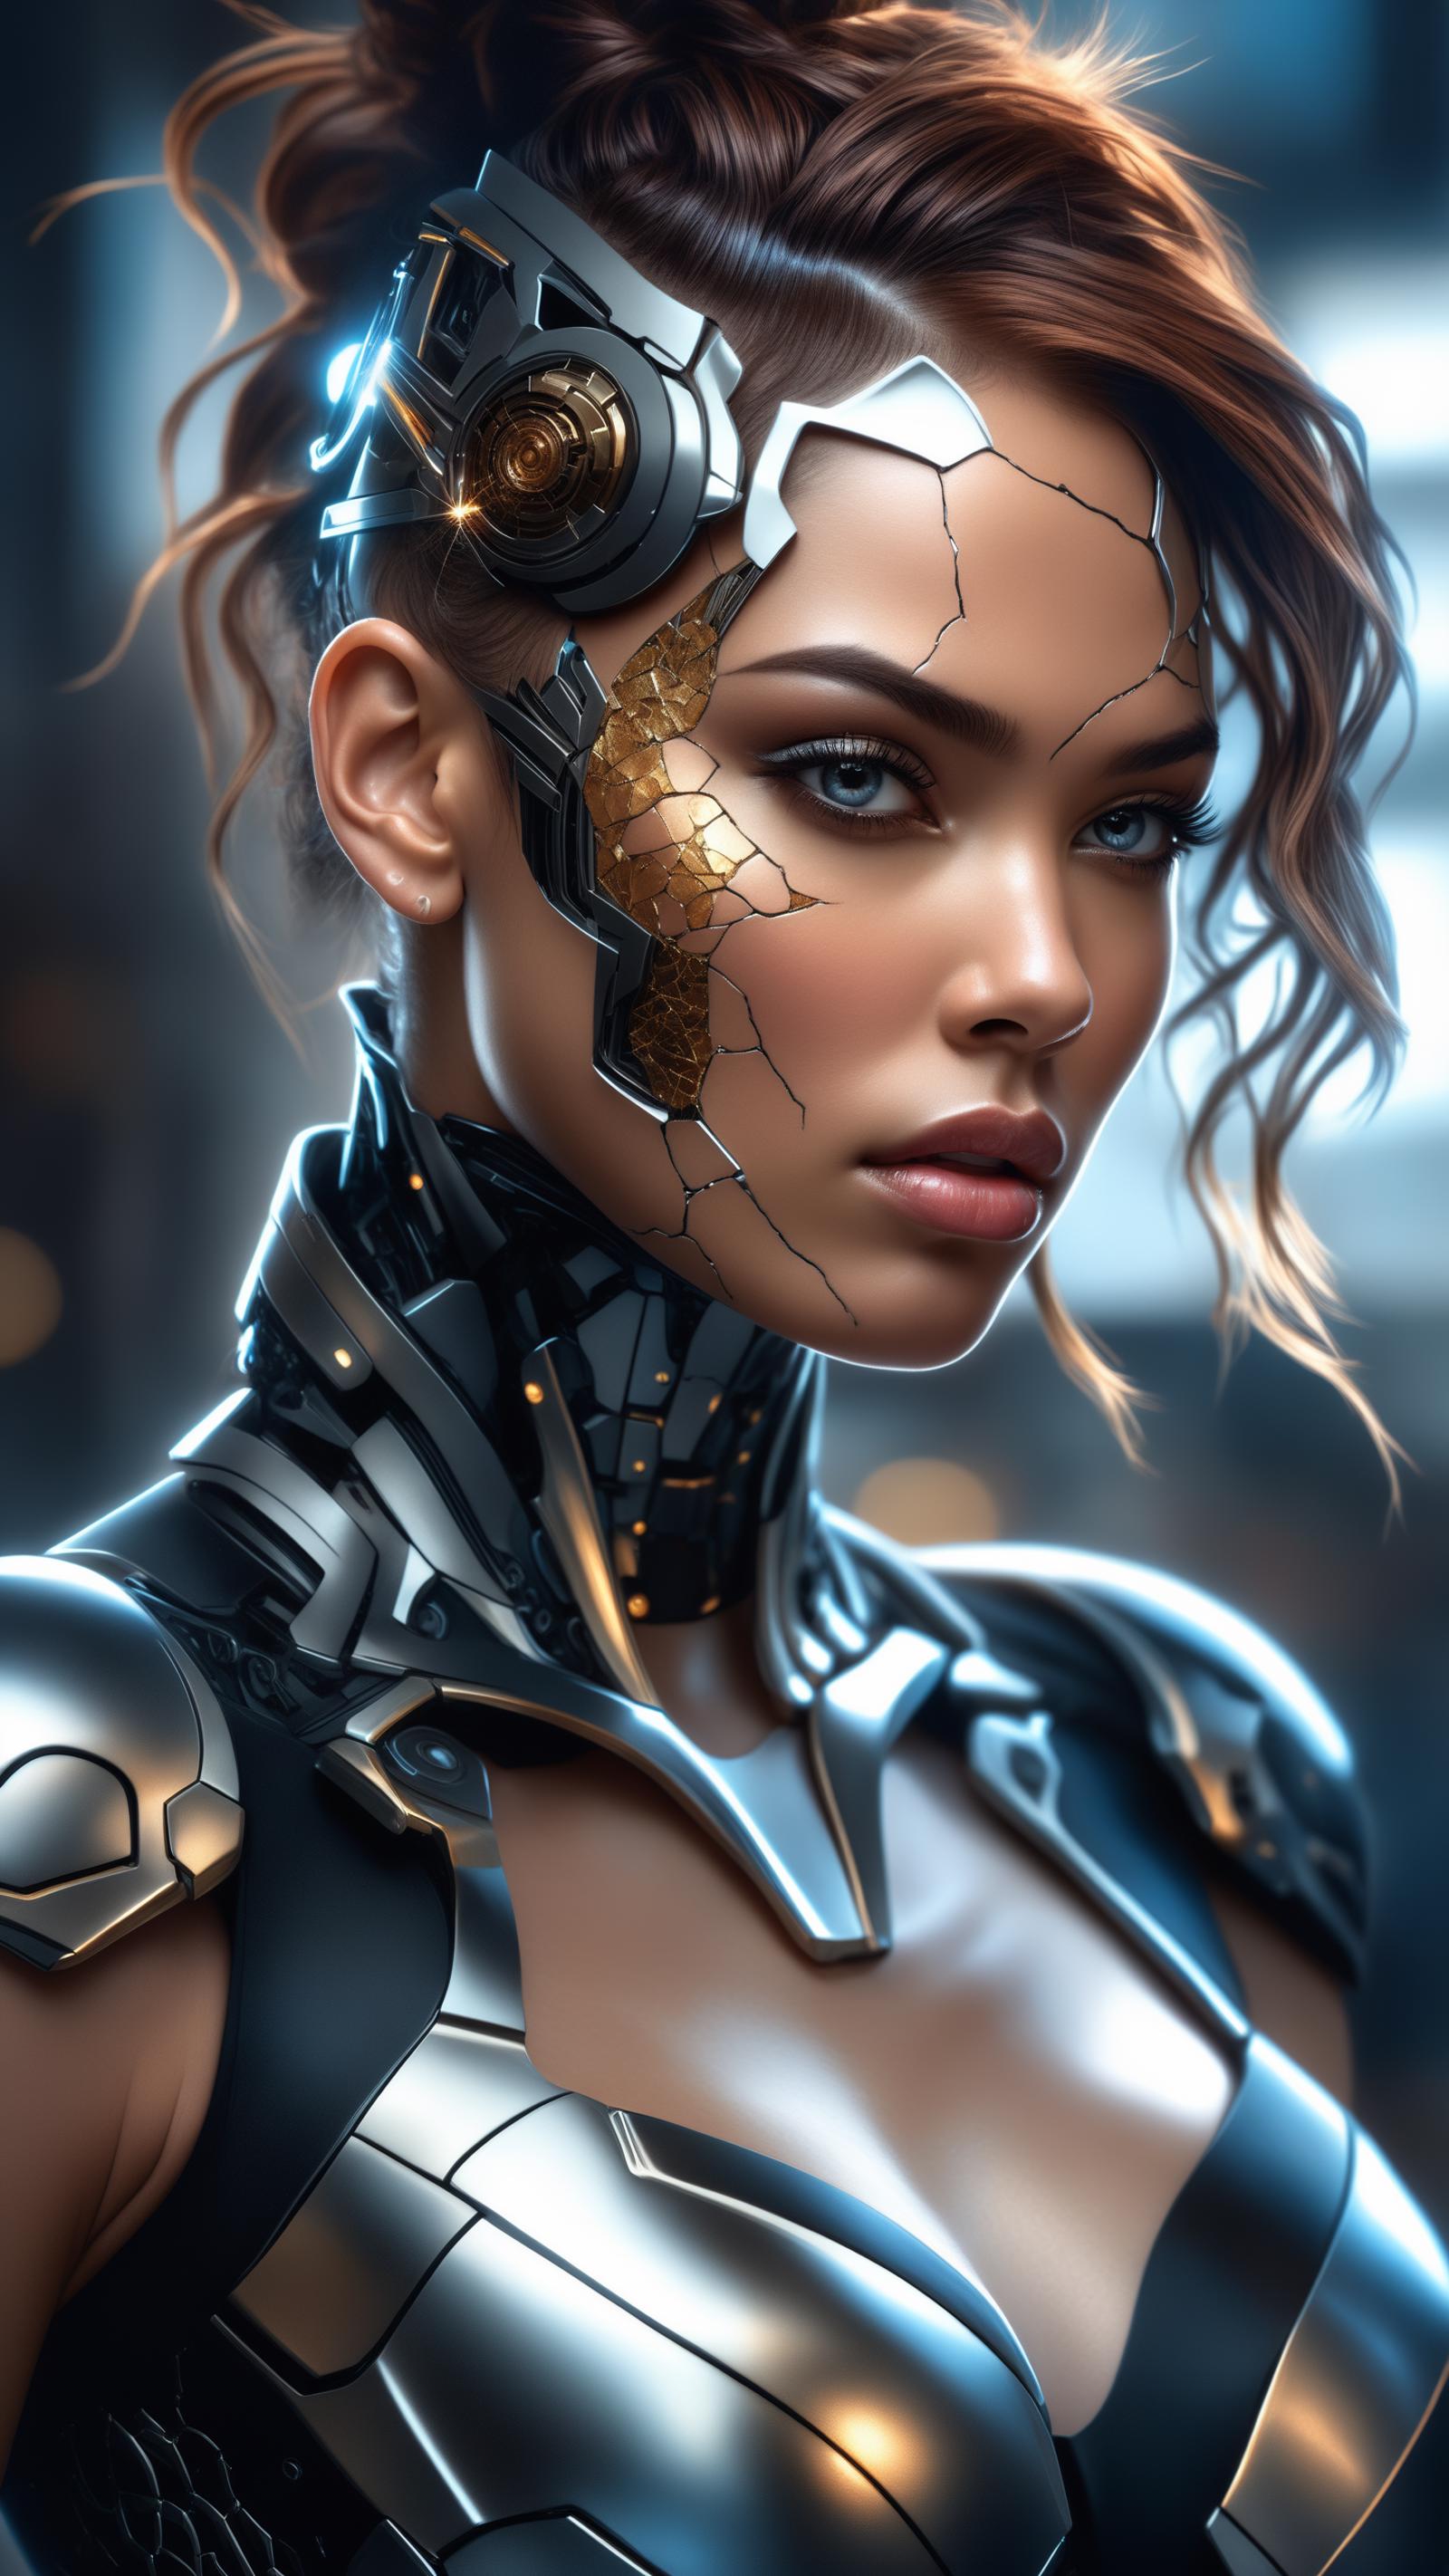 A digital painting of a woman with golden and silver robotic parts on her face and body.